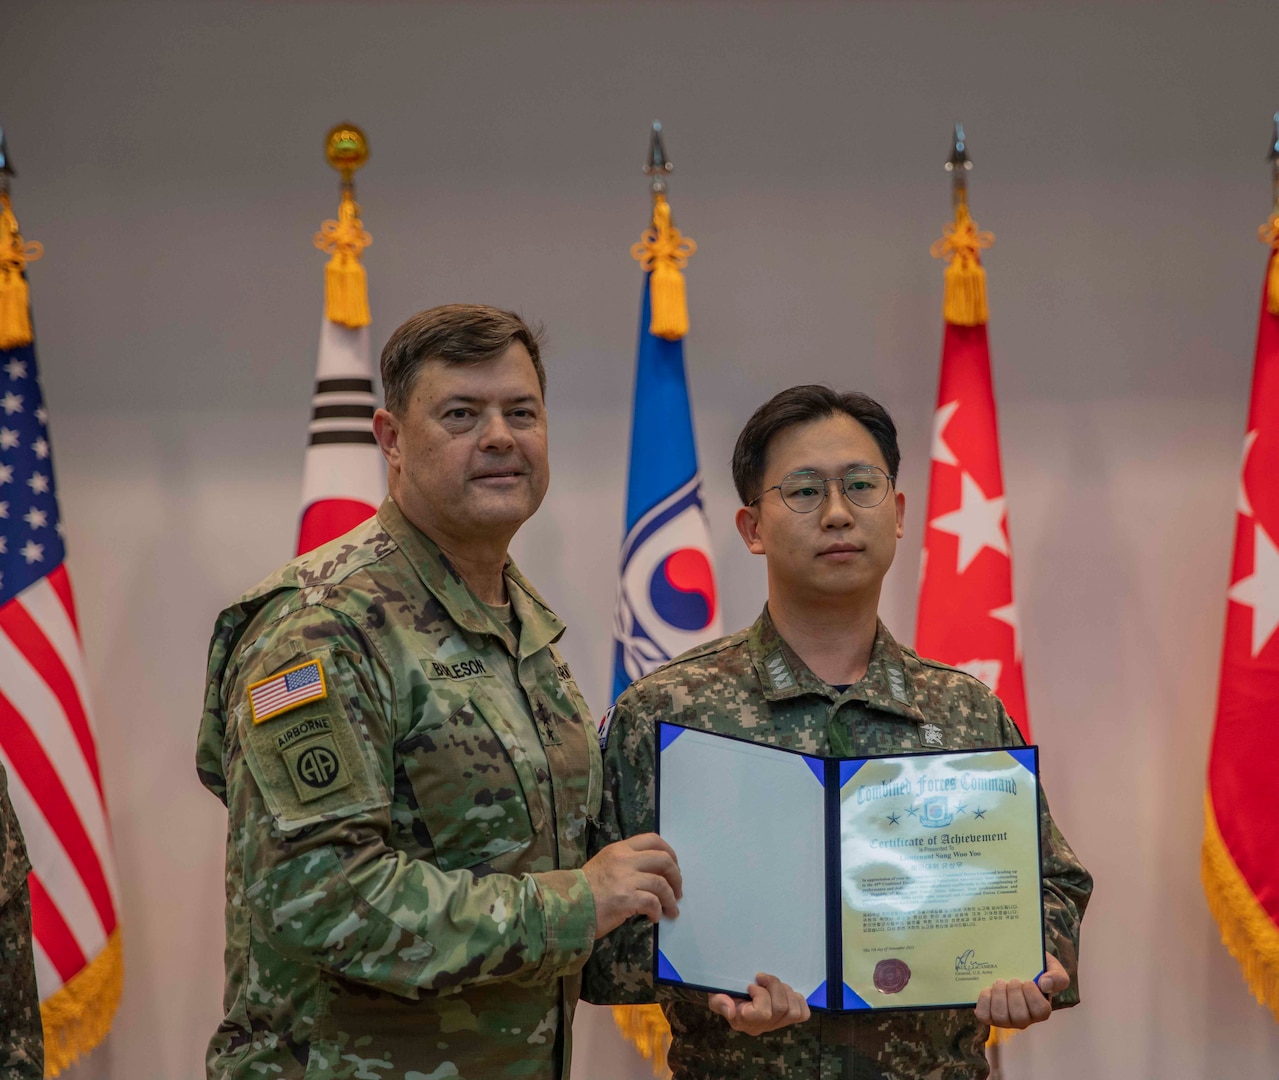 Lt. Gen. Willard M. Burleson III, chief of staff, Combined Forces Command (CFC), presents awards to member of the Republic of Korea military during a ceremony honoring the 45th Anniversary of the formation of the CFC, on U.S. Army Garrison-Humphreys Nov. 7, 2023. (U.S. Army photo by: Cpl. Jorge Reyes, Eighth Army Public Affairs)